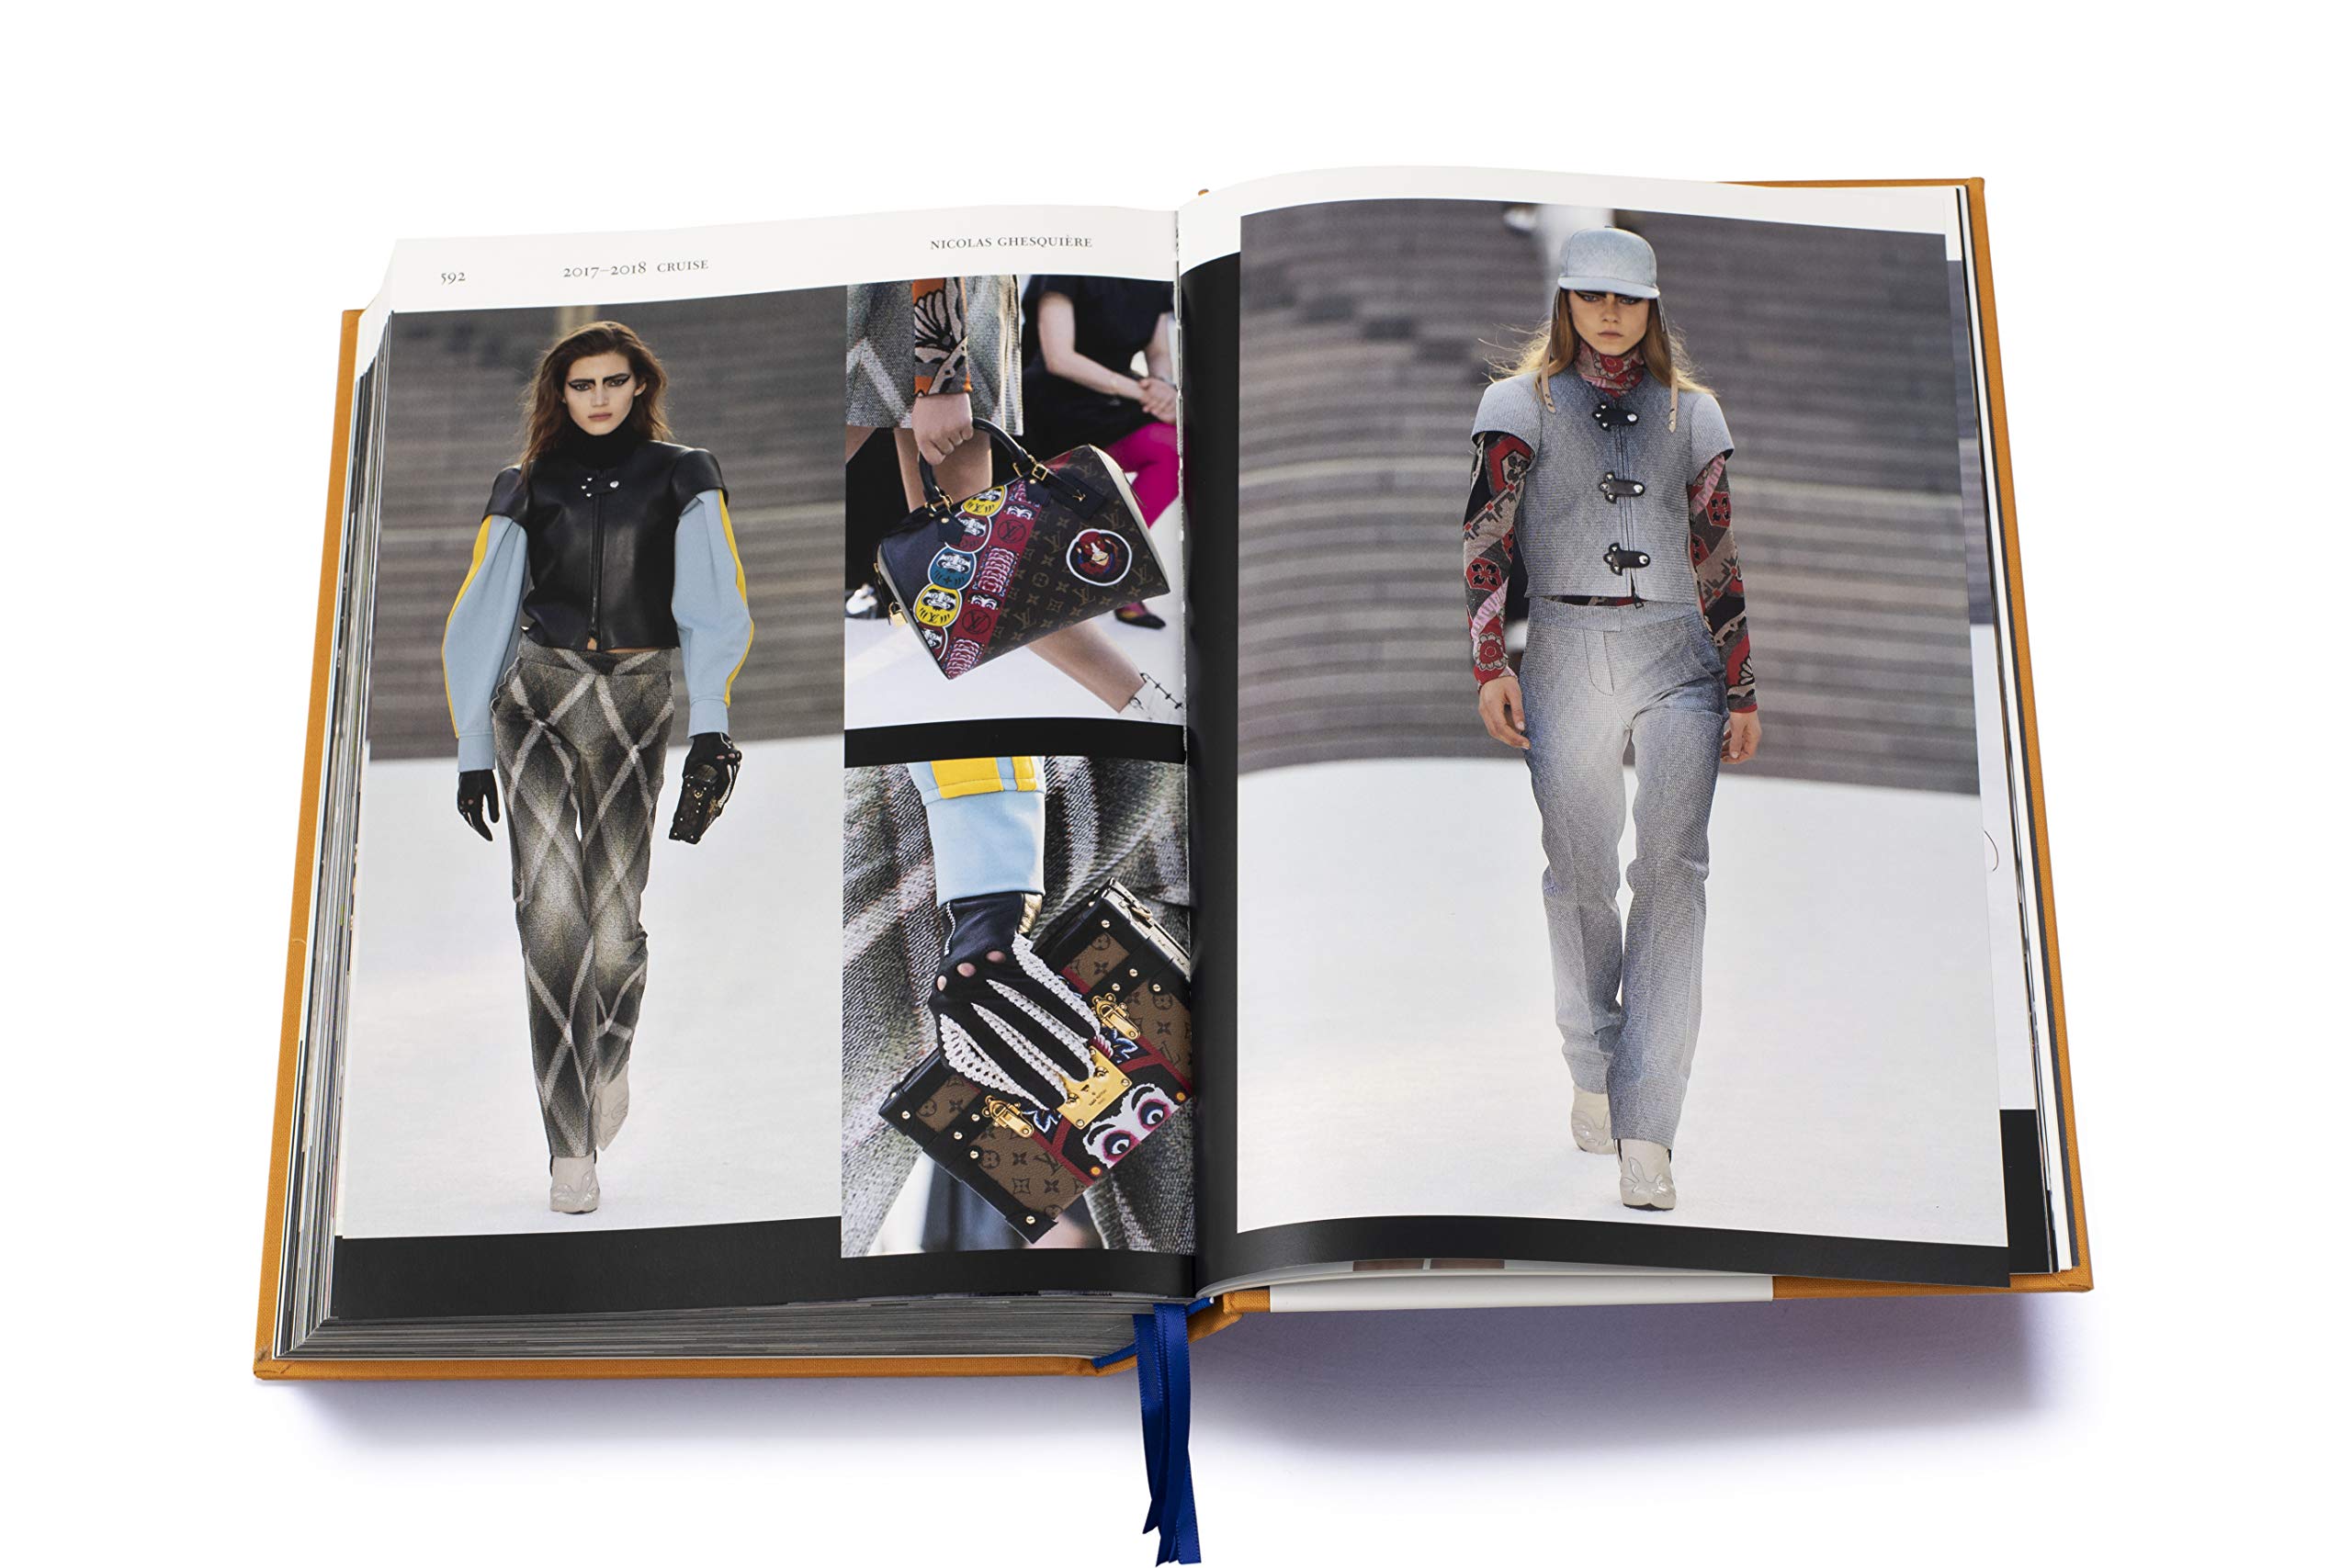 LOUIS VUITTON CATWALK BOOK - THE COMPLETE FASHION COLLECTIONS 